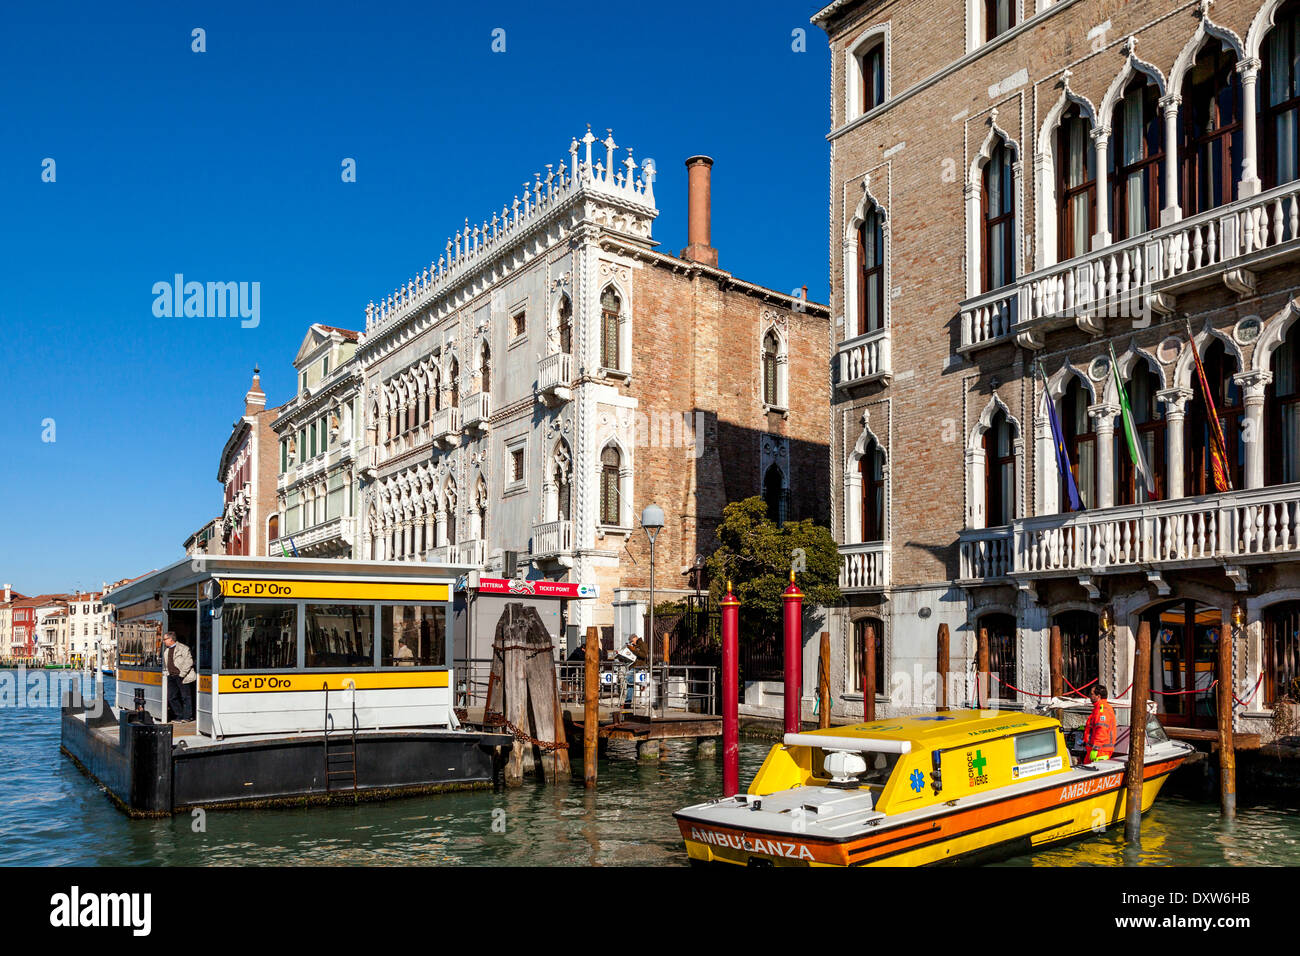 Ambulance On The Grand Canal, Venice, Italy Stock Photo